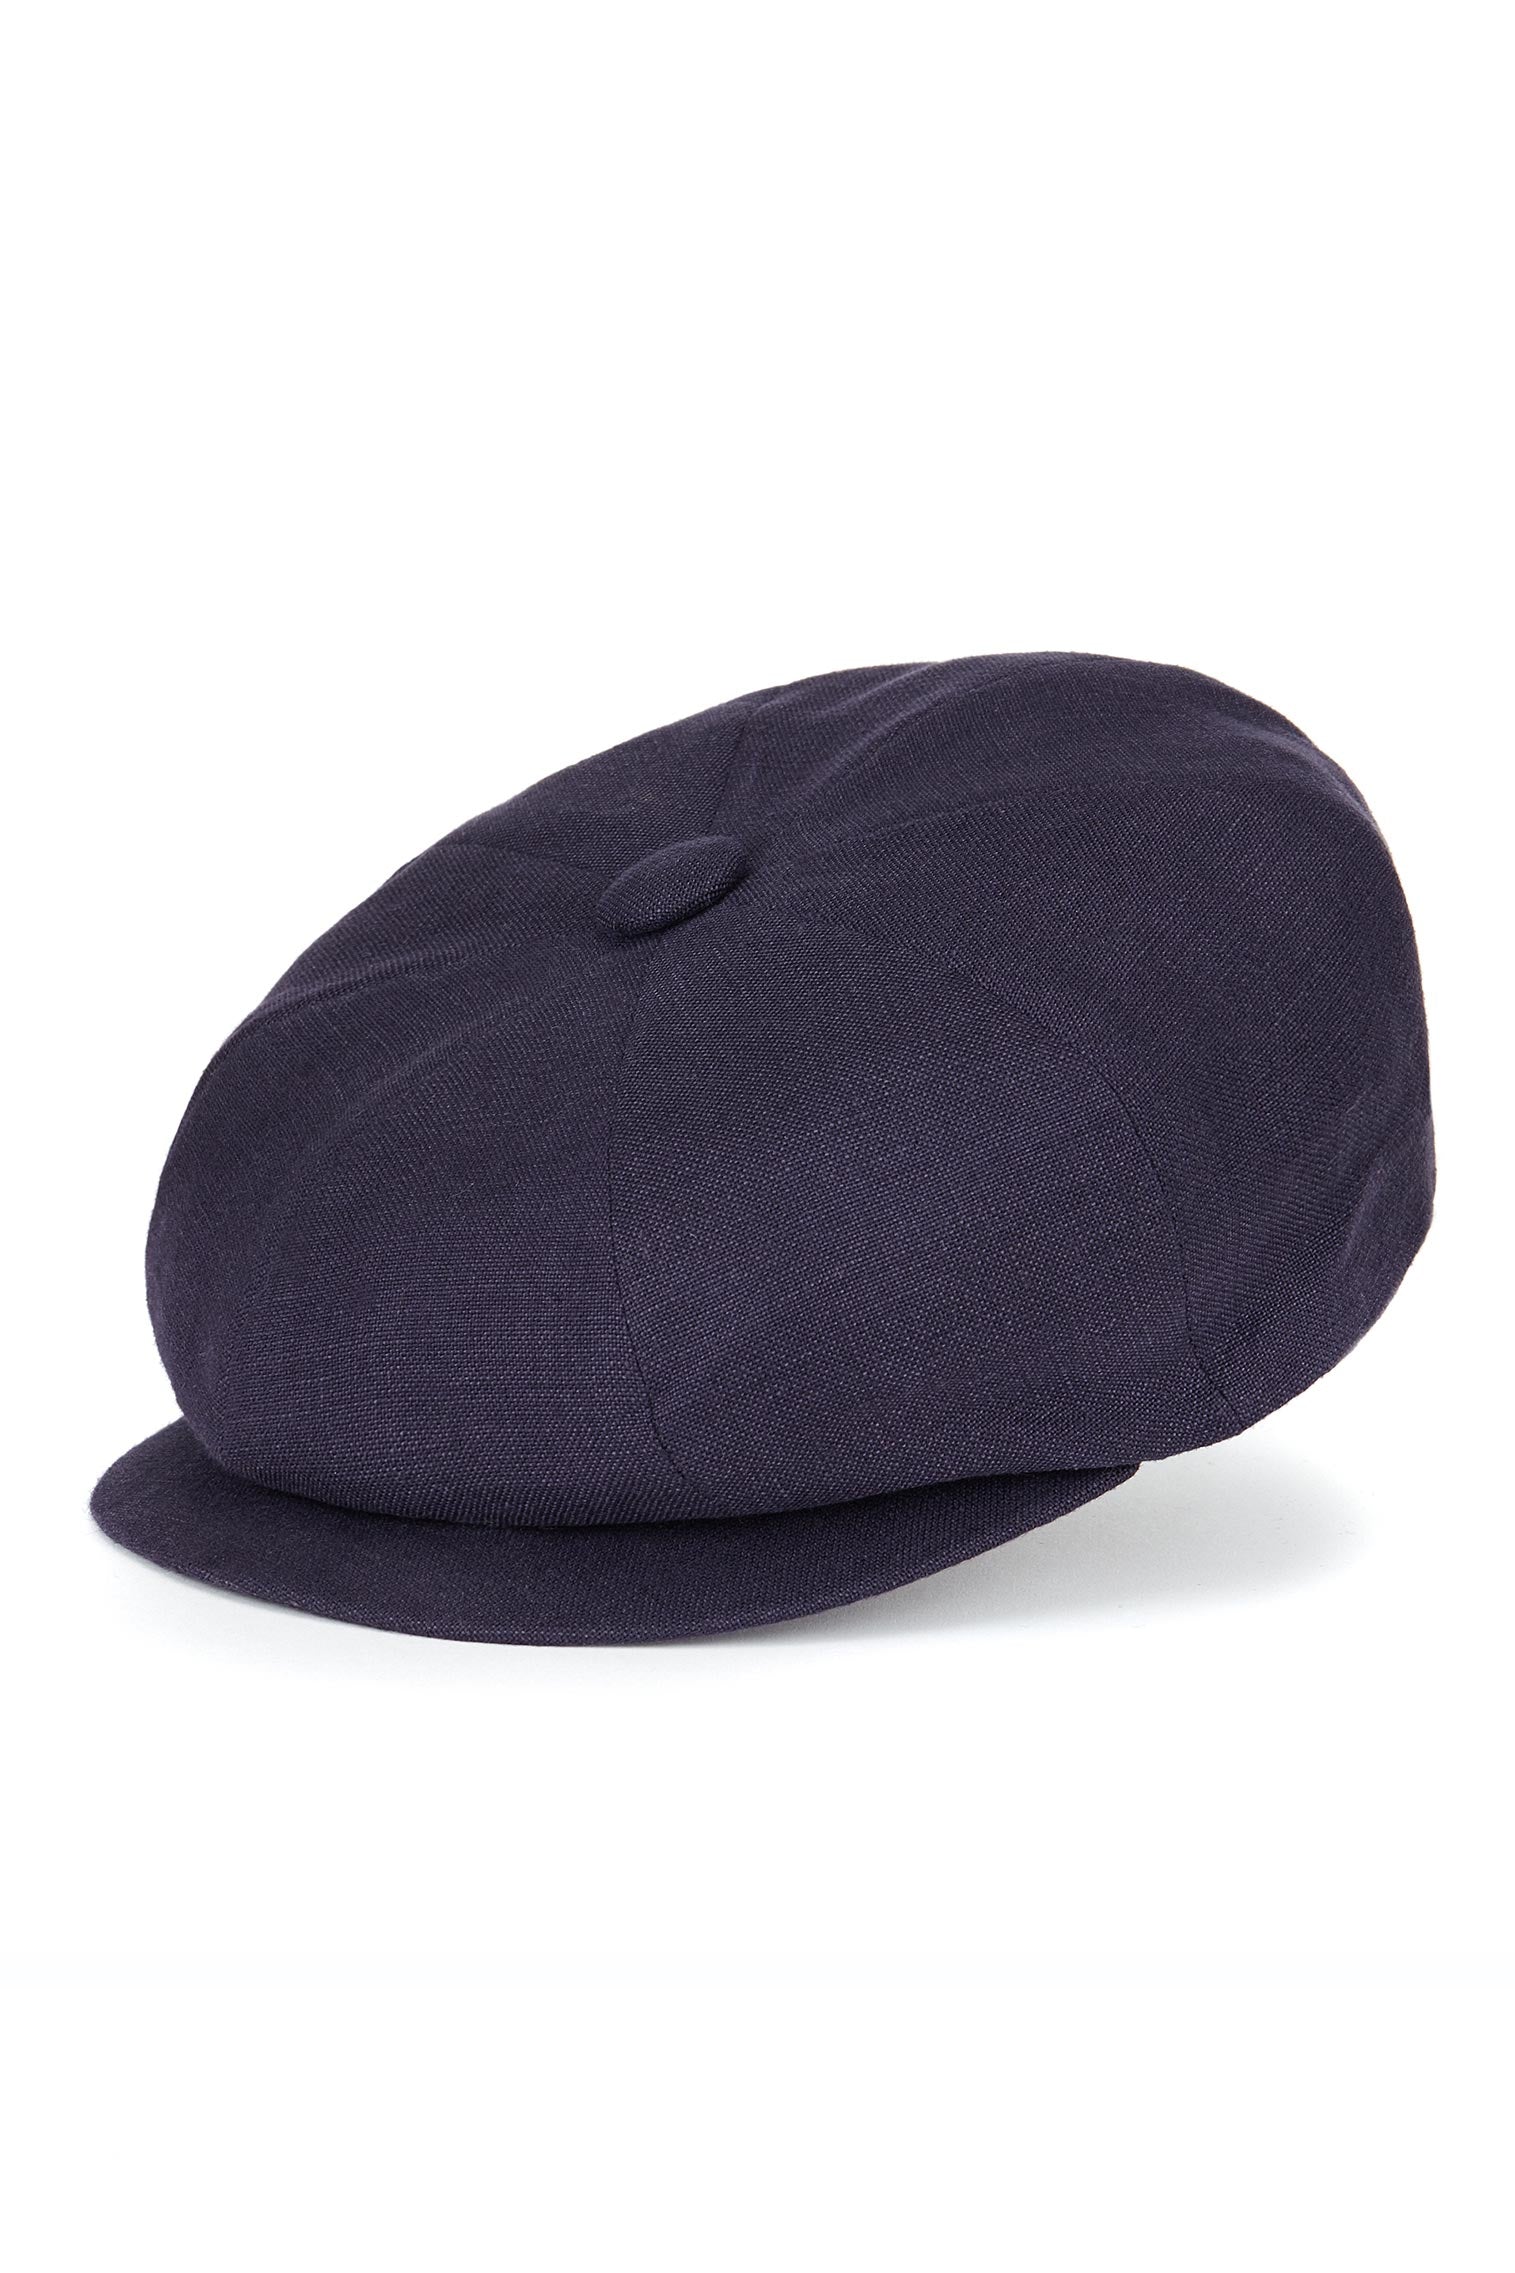 Navy Linen Muirfield Bakerboy Cap - Hats for Round Face Shapes - Lock & Co. Hatters London UK